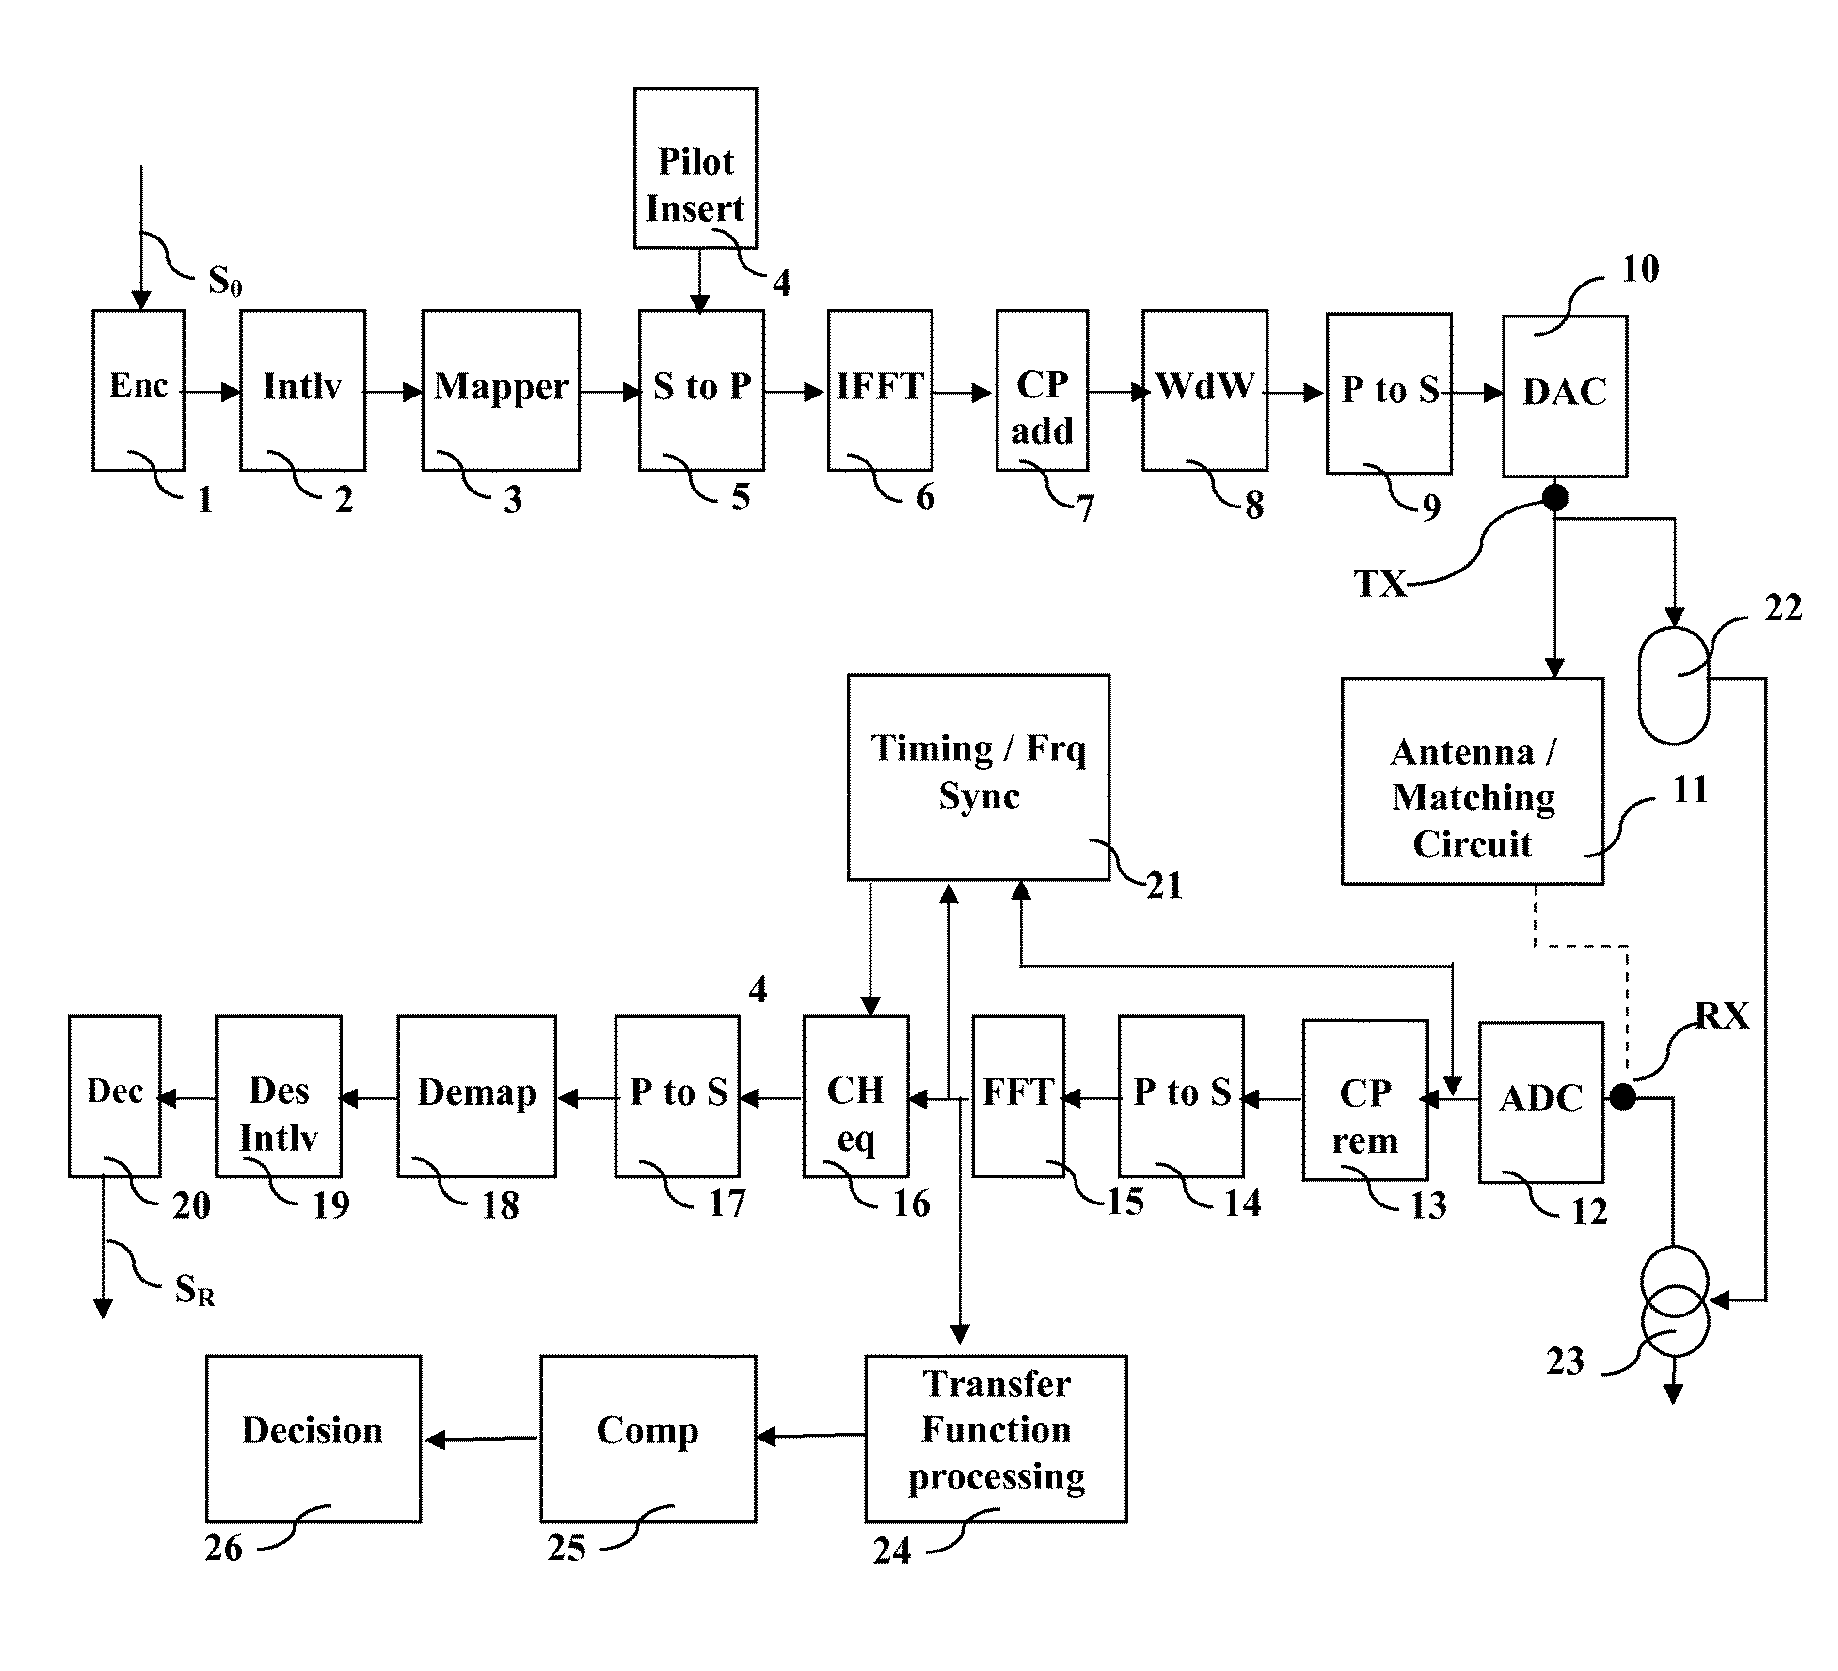 Built-in self-test technique for detection of imperfectly connected antenna in OFDM transceivers